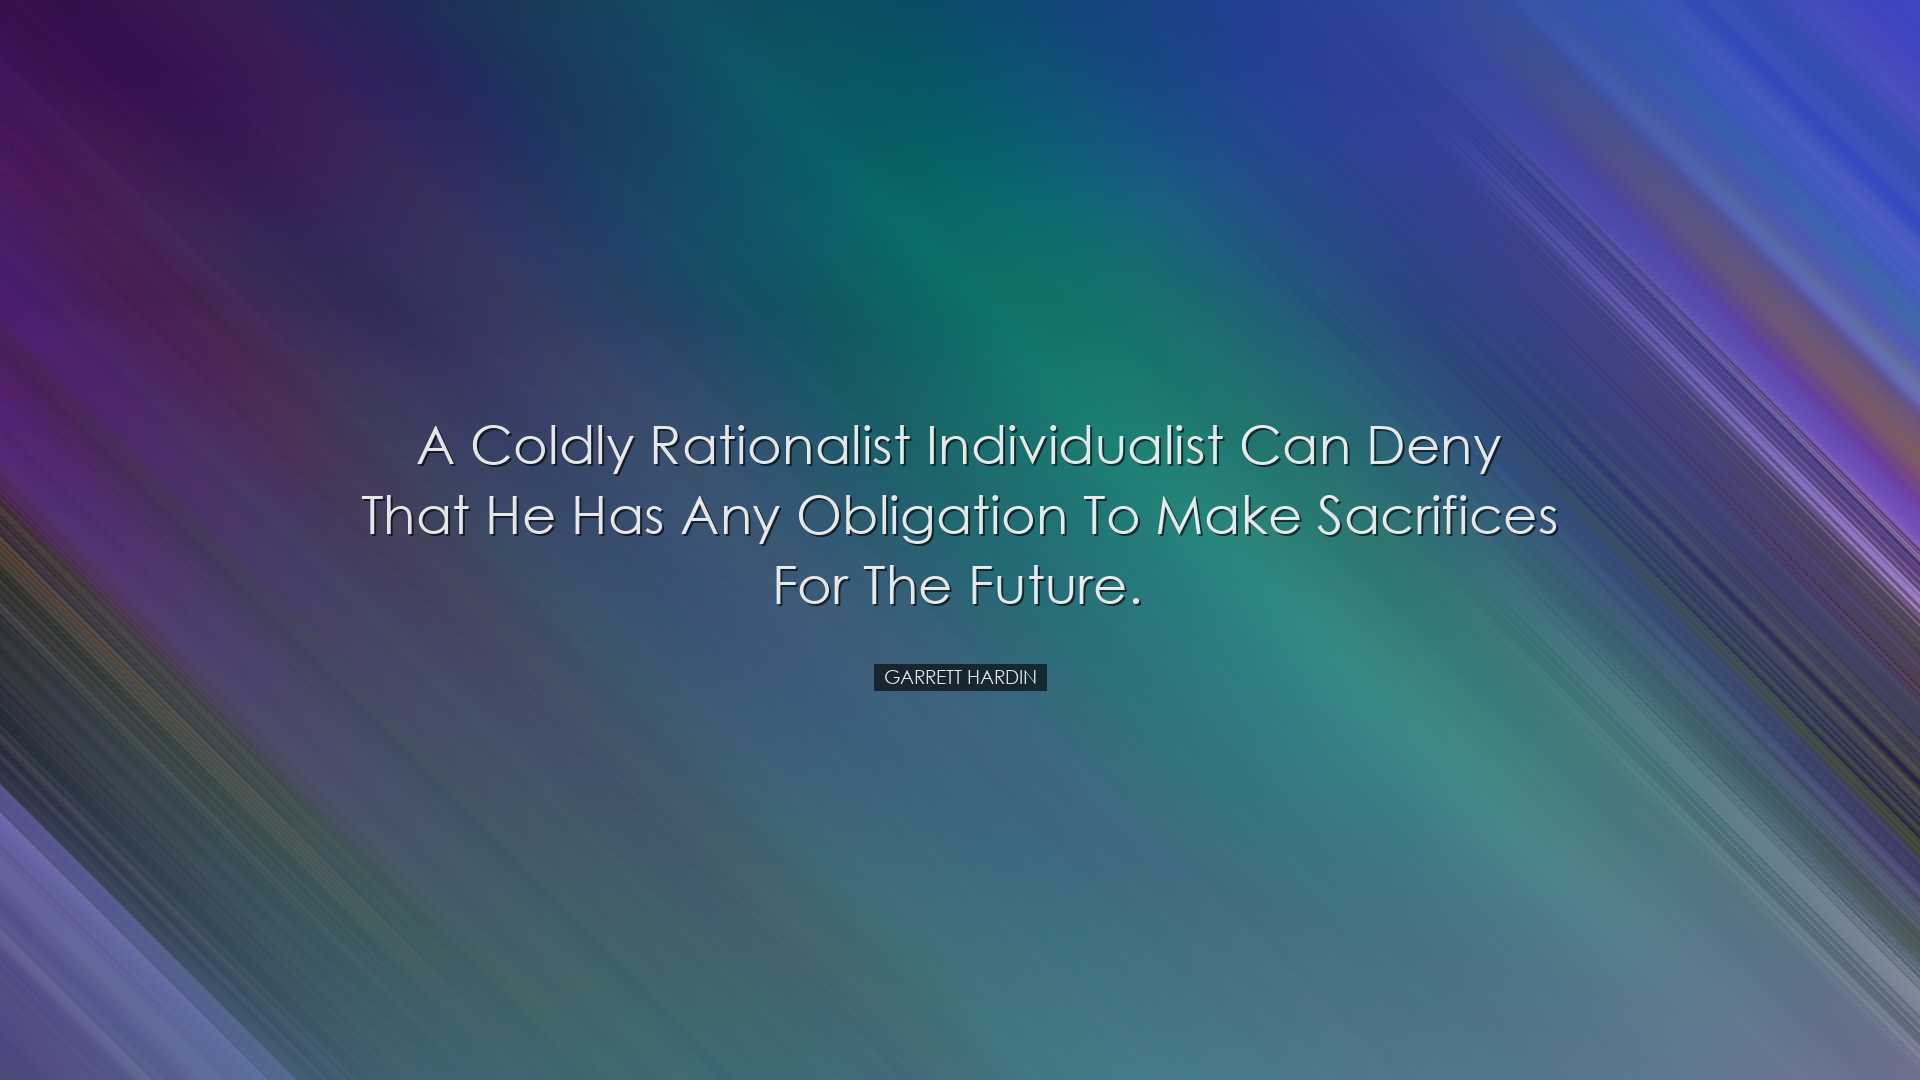 A coldly rationalist individualist can deny that he has any obliga